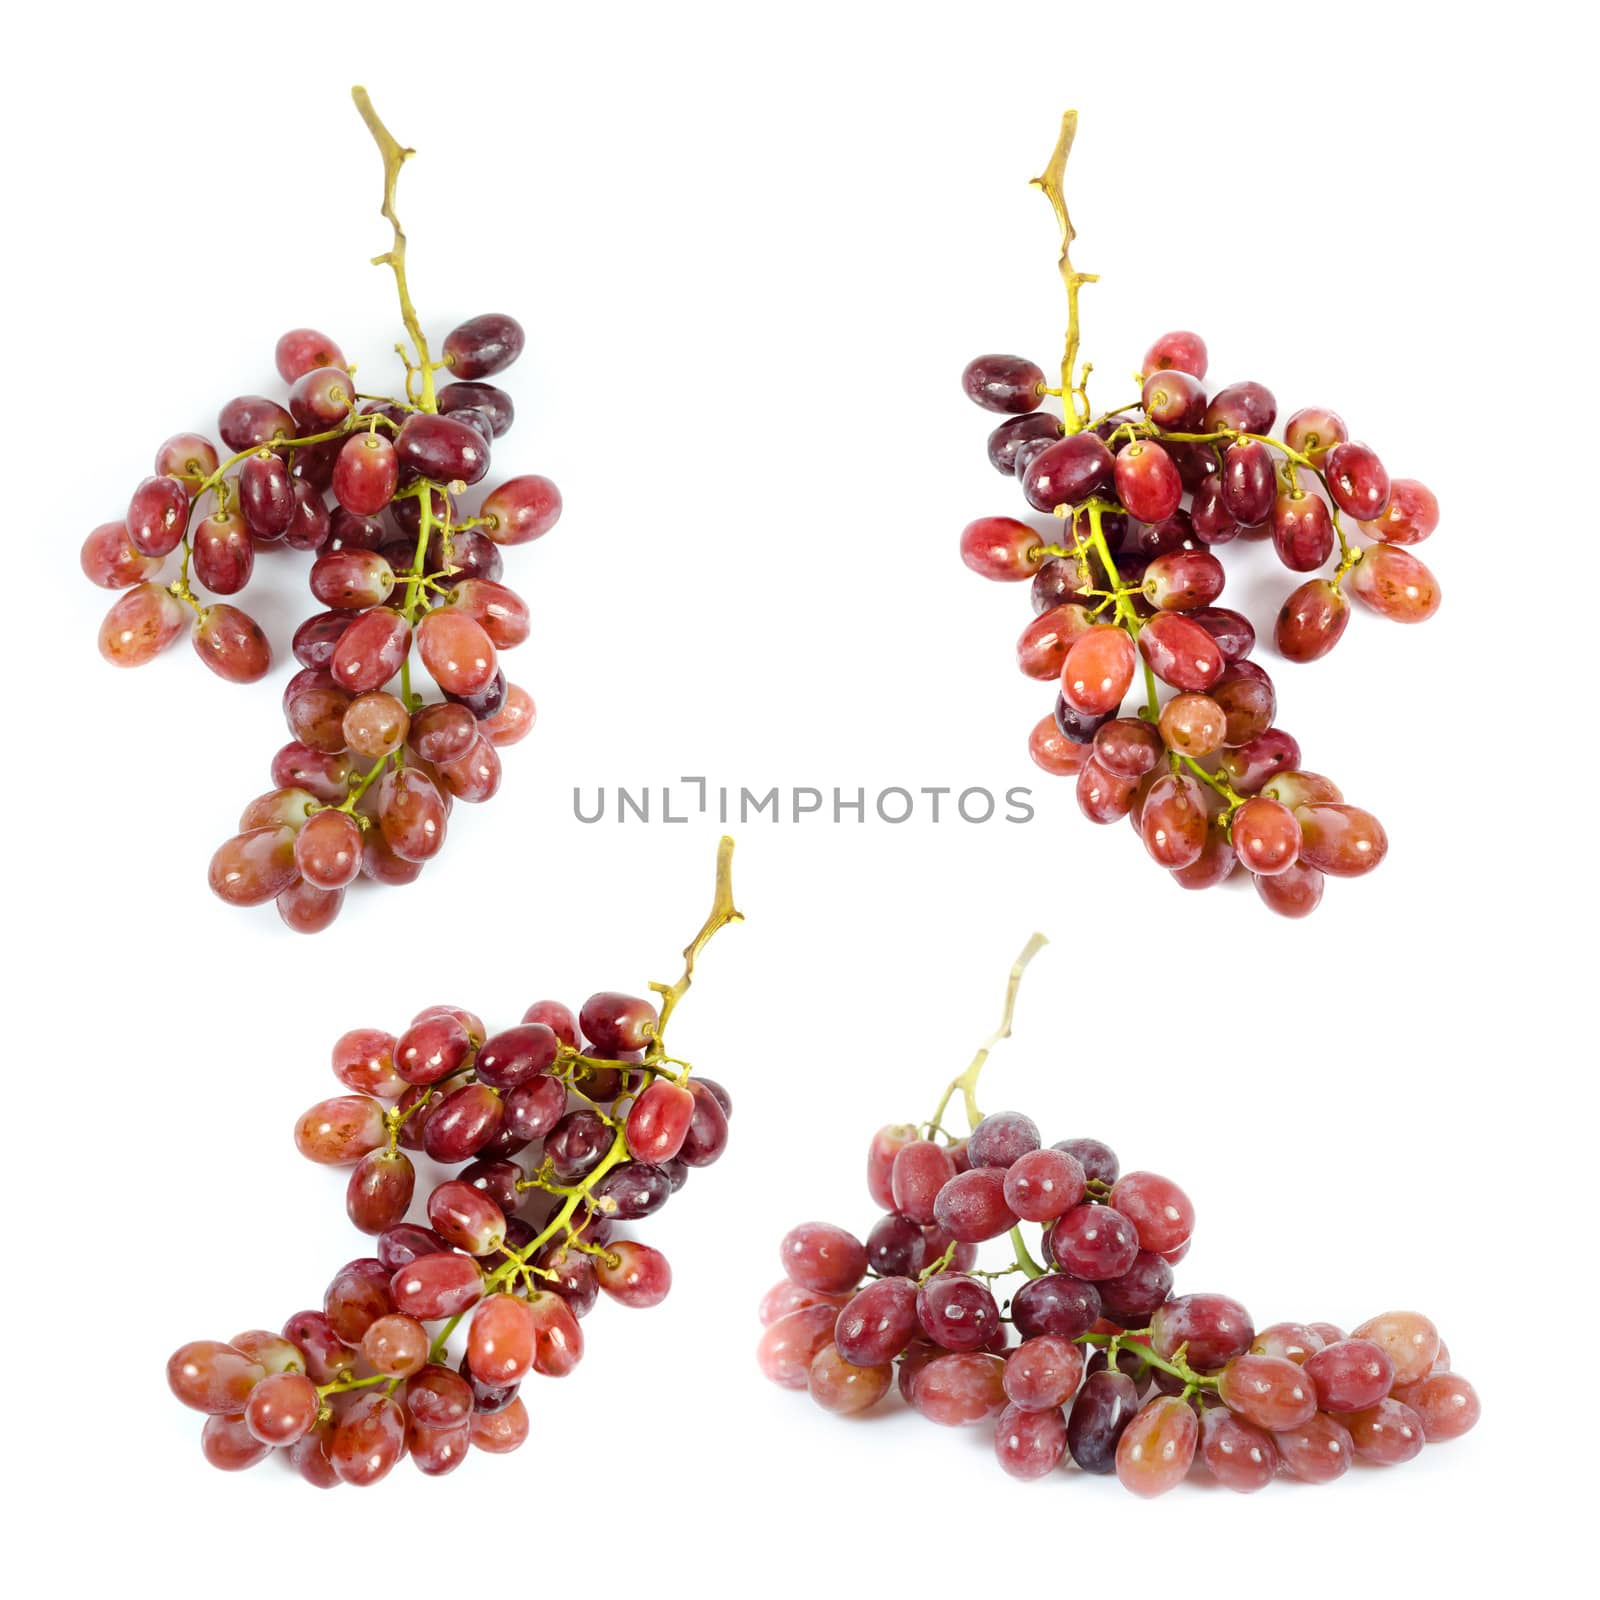 Collage from photographs of  red grape over white background.